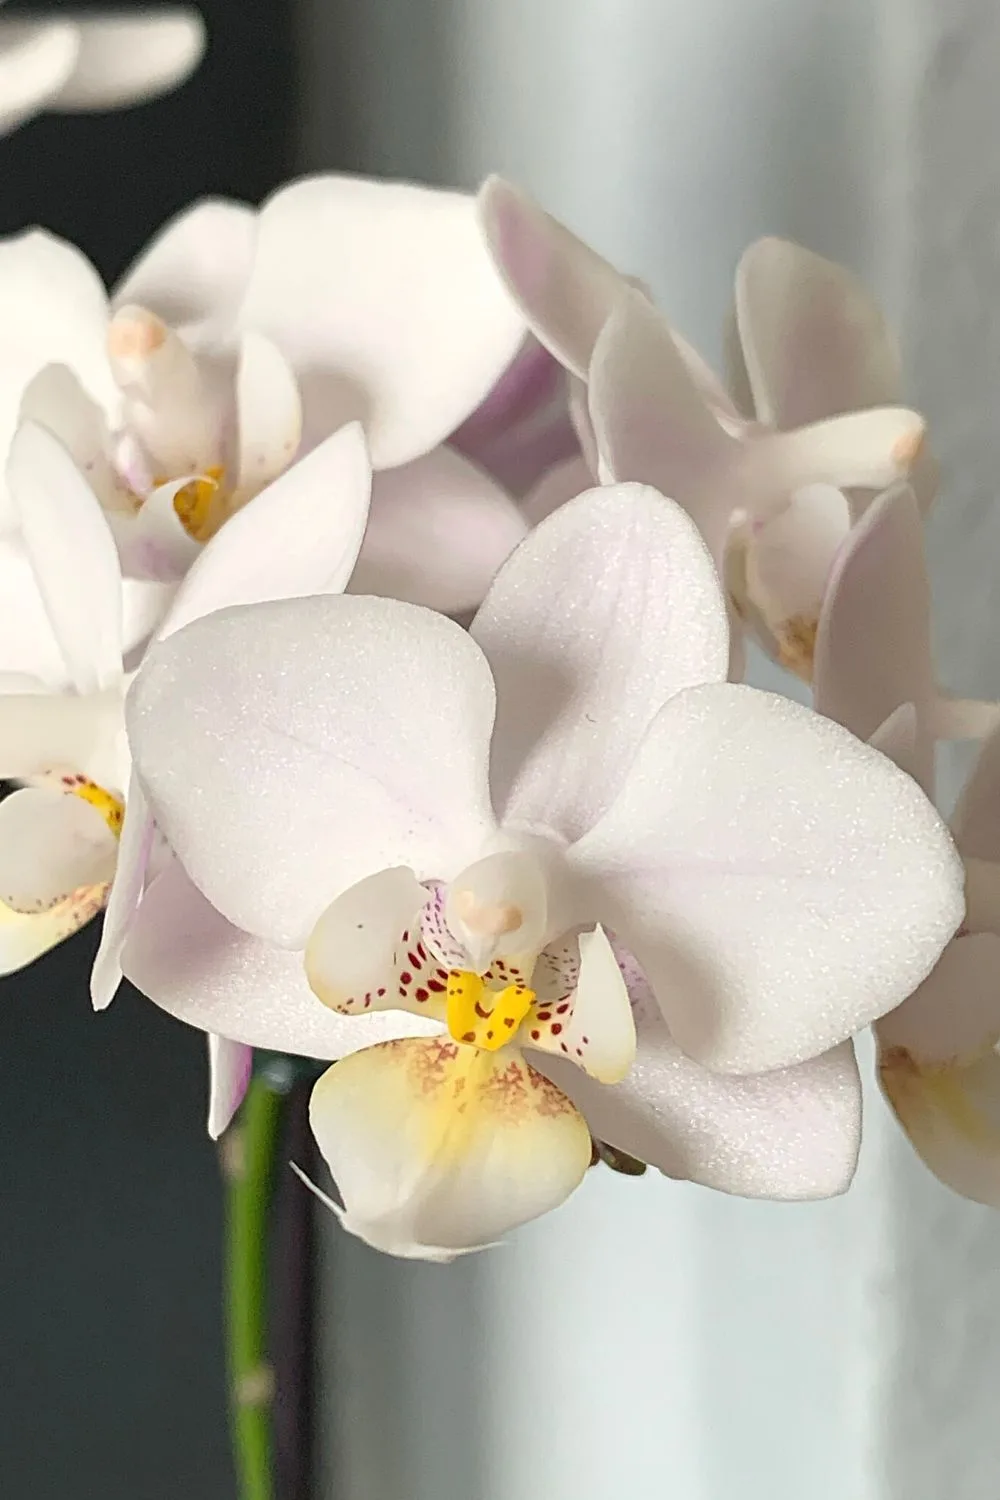 Moth Orchid grows well in both soil and water